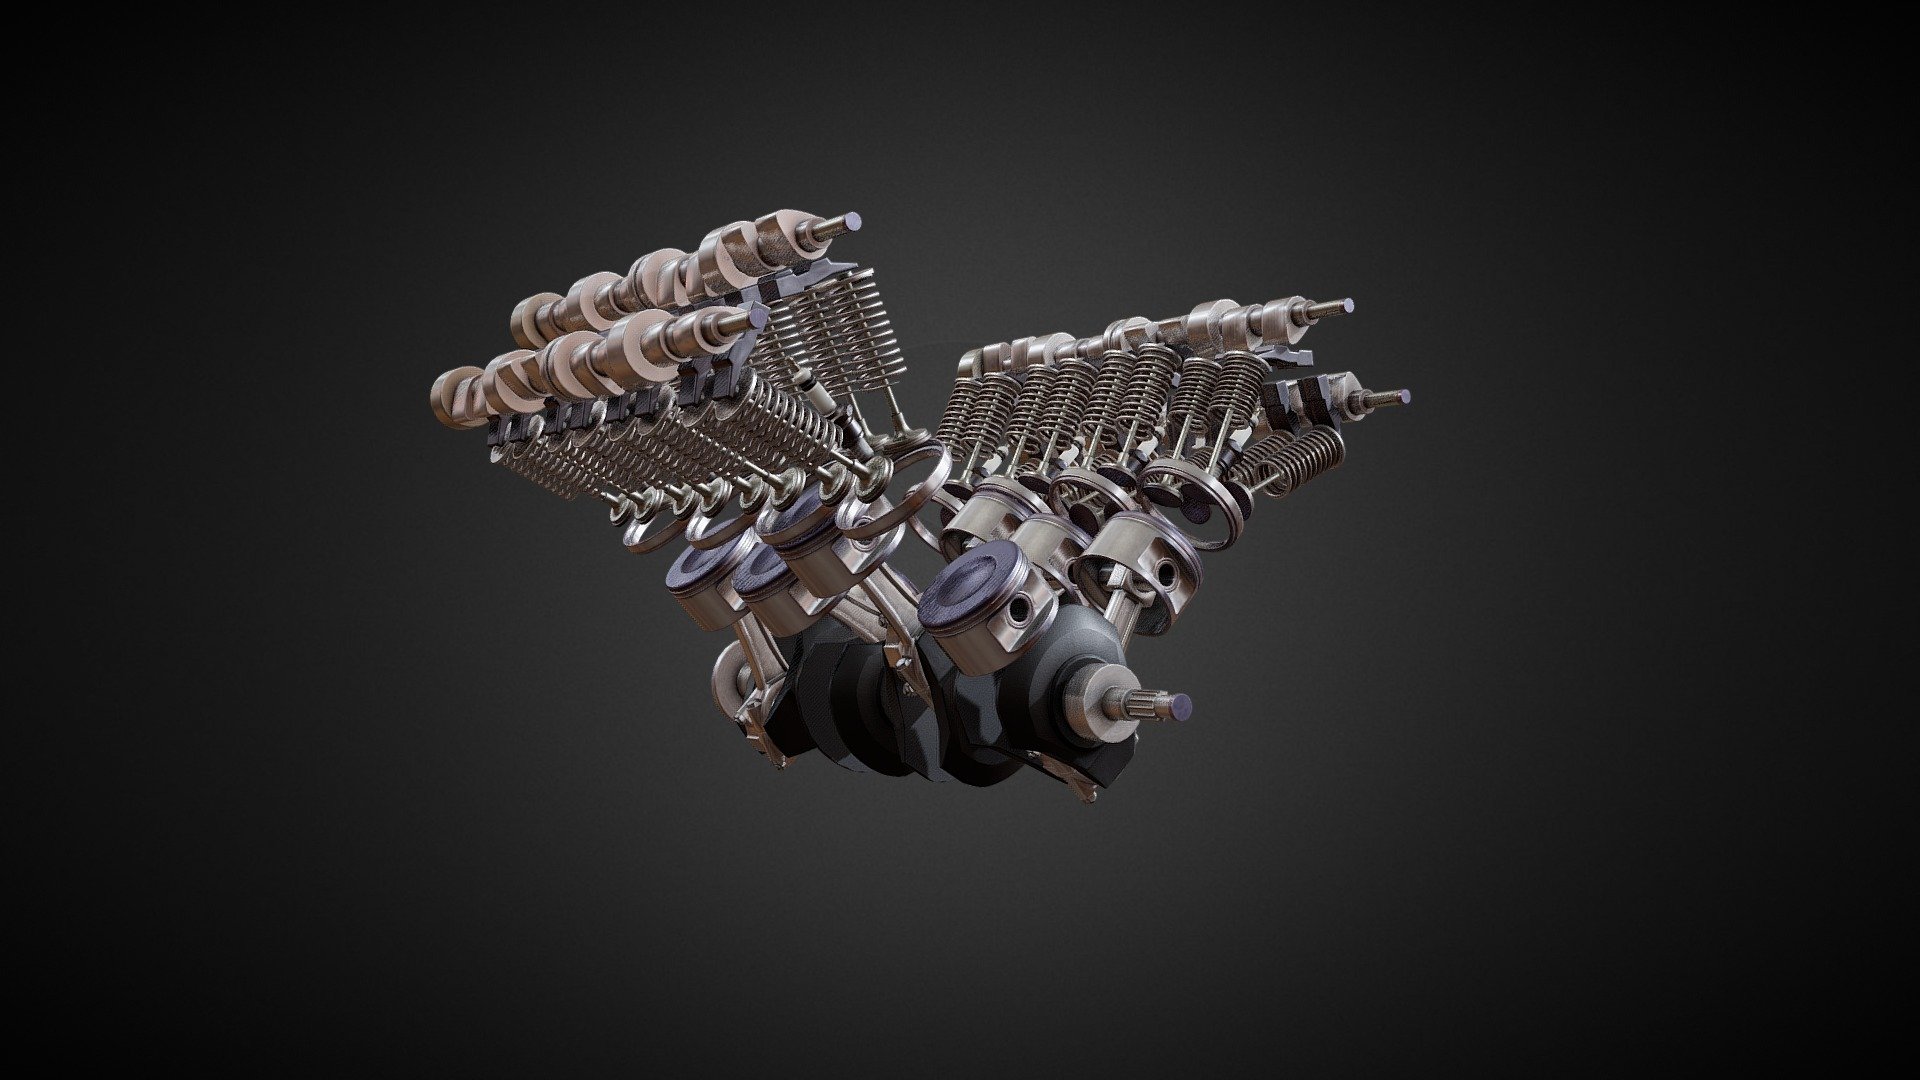 Made for a close-up cinematics.

Mid Poly Crankshaft: 7032 tris

Mid Poly Walker and Piston: 6524 x8 tris

Mid Poly Camshafts, Springs, Pins, etc: 83488 x4 tris

Textures format: PNG (4096x4096) x1

3D Artist: Arthur Glushko - Mid Poly / Сinematic | V8 Engine - 3D model by Saritasa 3d model